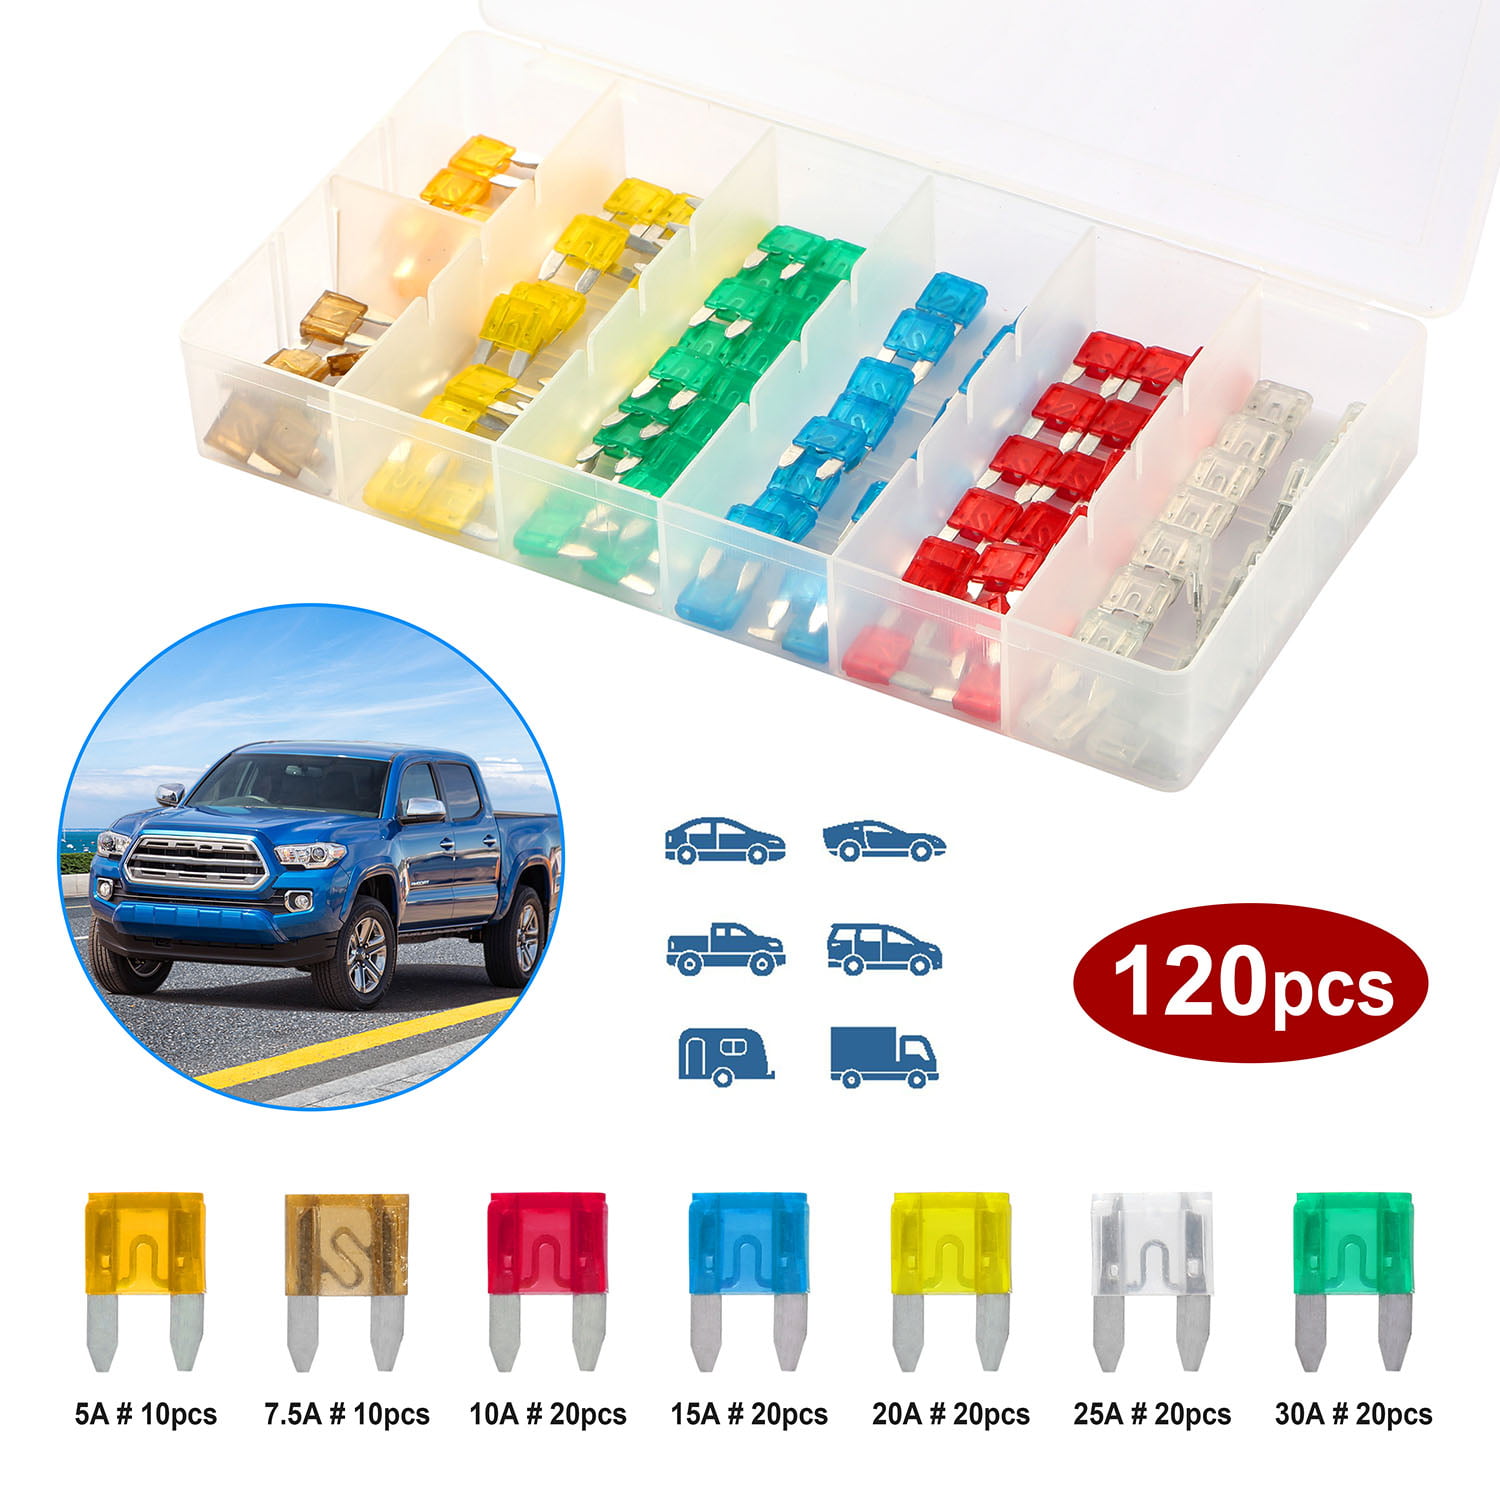 Assorted Fuse with Puller Tool MuHize Automotive Standard & Mini Replacement Car RV SUV Truck Camper Fuses 2A/3A/5A/7.5A/10A/15A/20A/25A/30A/35A 220PCS Car Blade Fuses Assortment Kit 